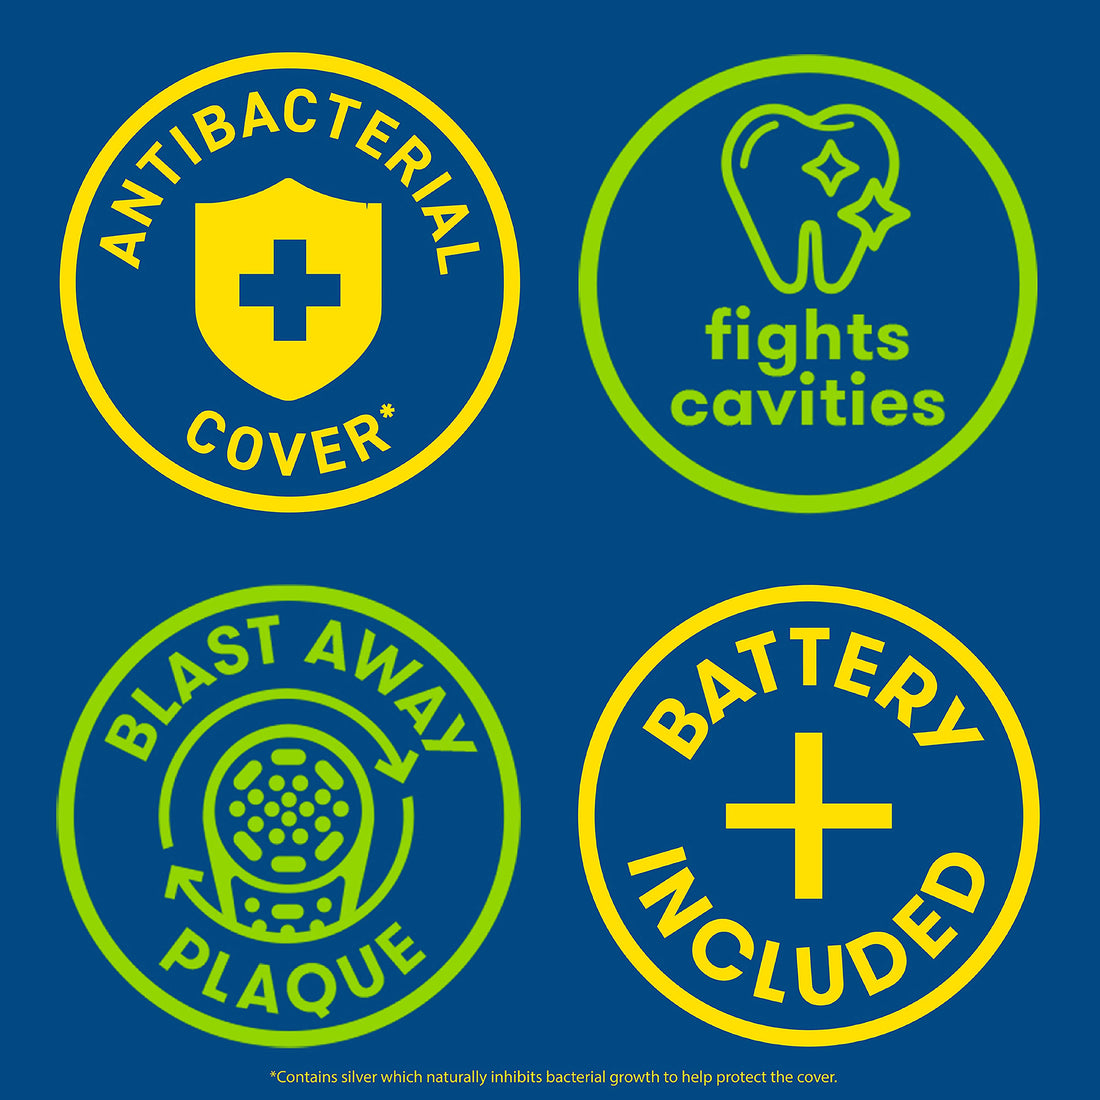 Icons: Antibacterial Cover, fights cavities, Blast away plaque, battery included